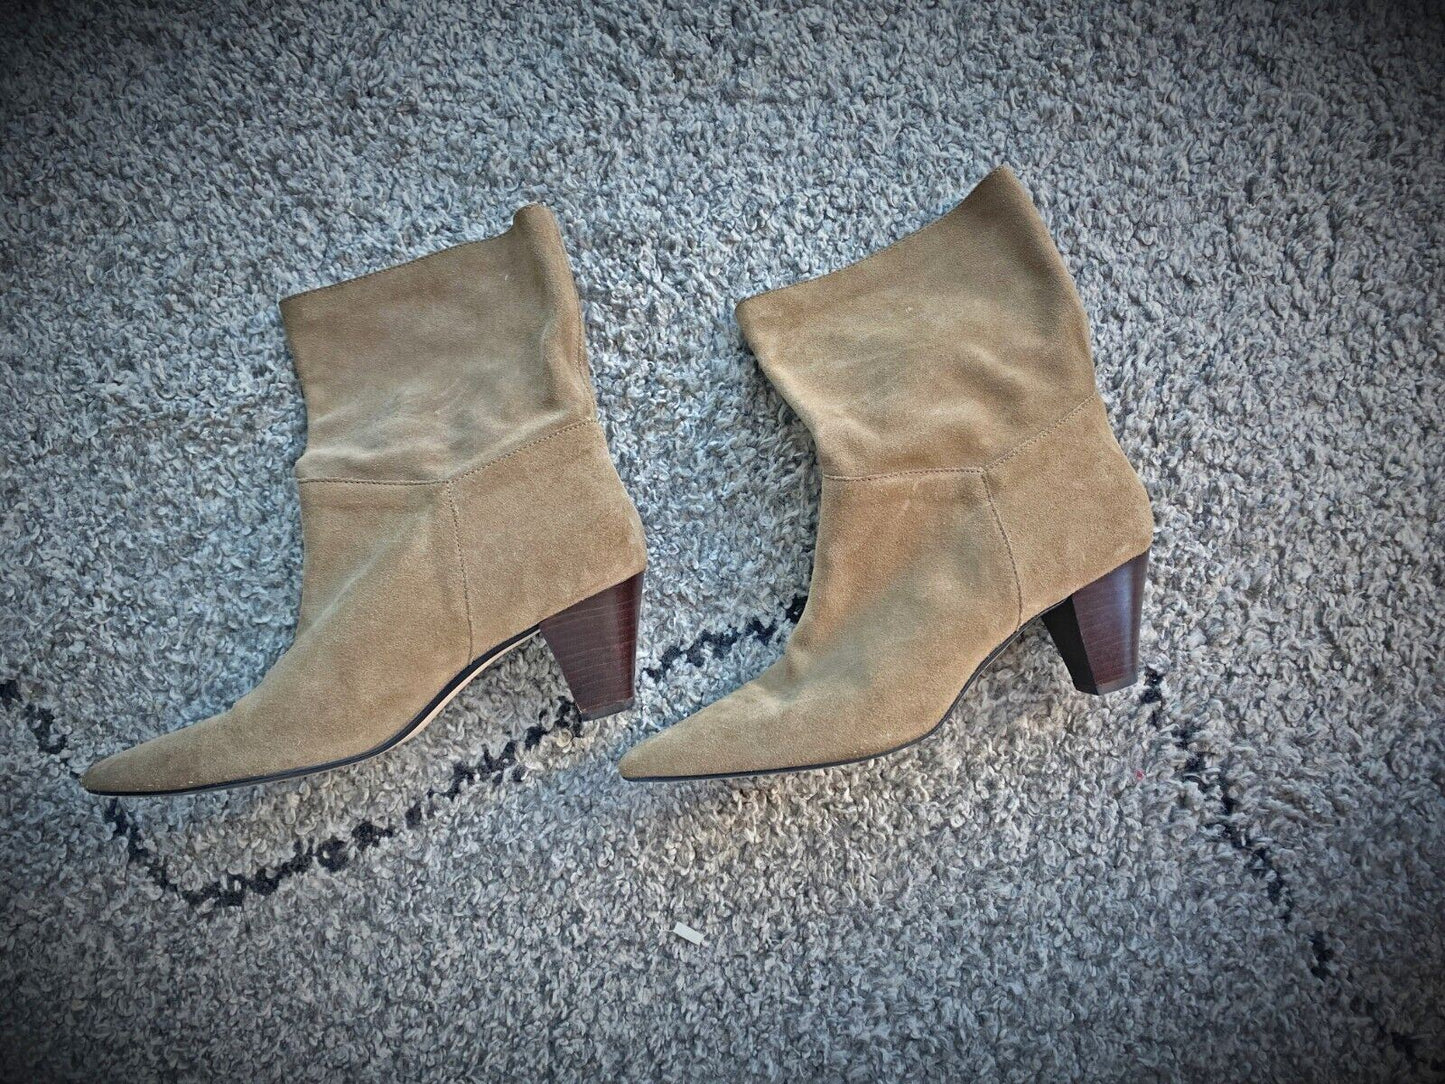 Zara Mid Calf Boots | Taupe/Brown, Sz 41, Genuine Suede, Pointed Toe, WORN ONCE